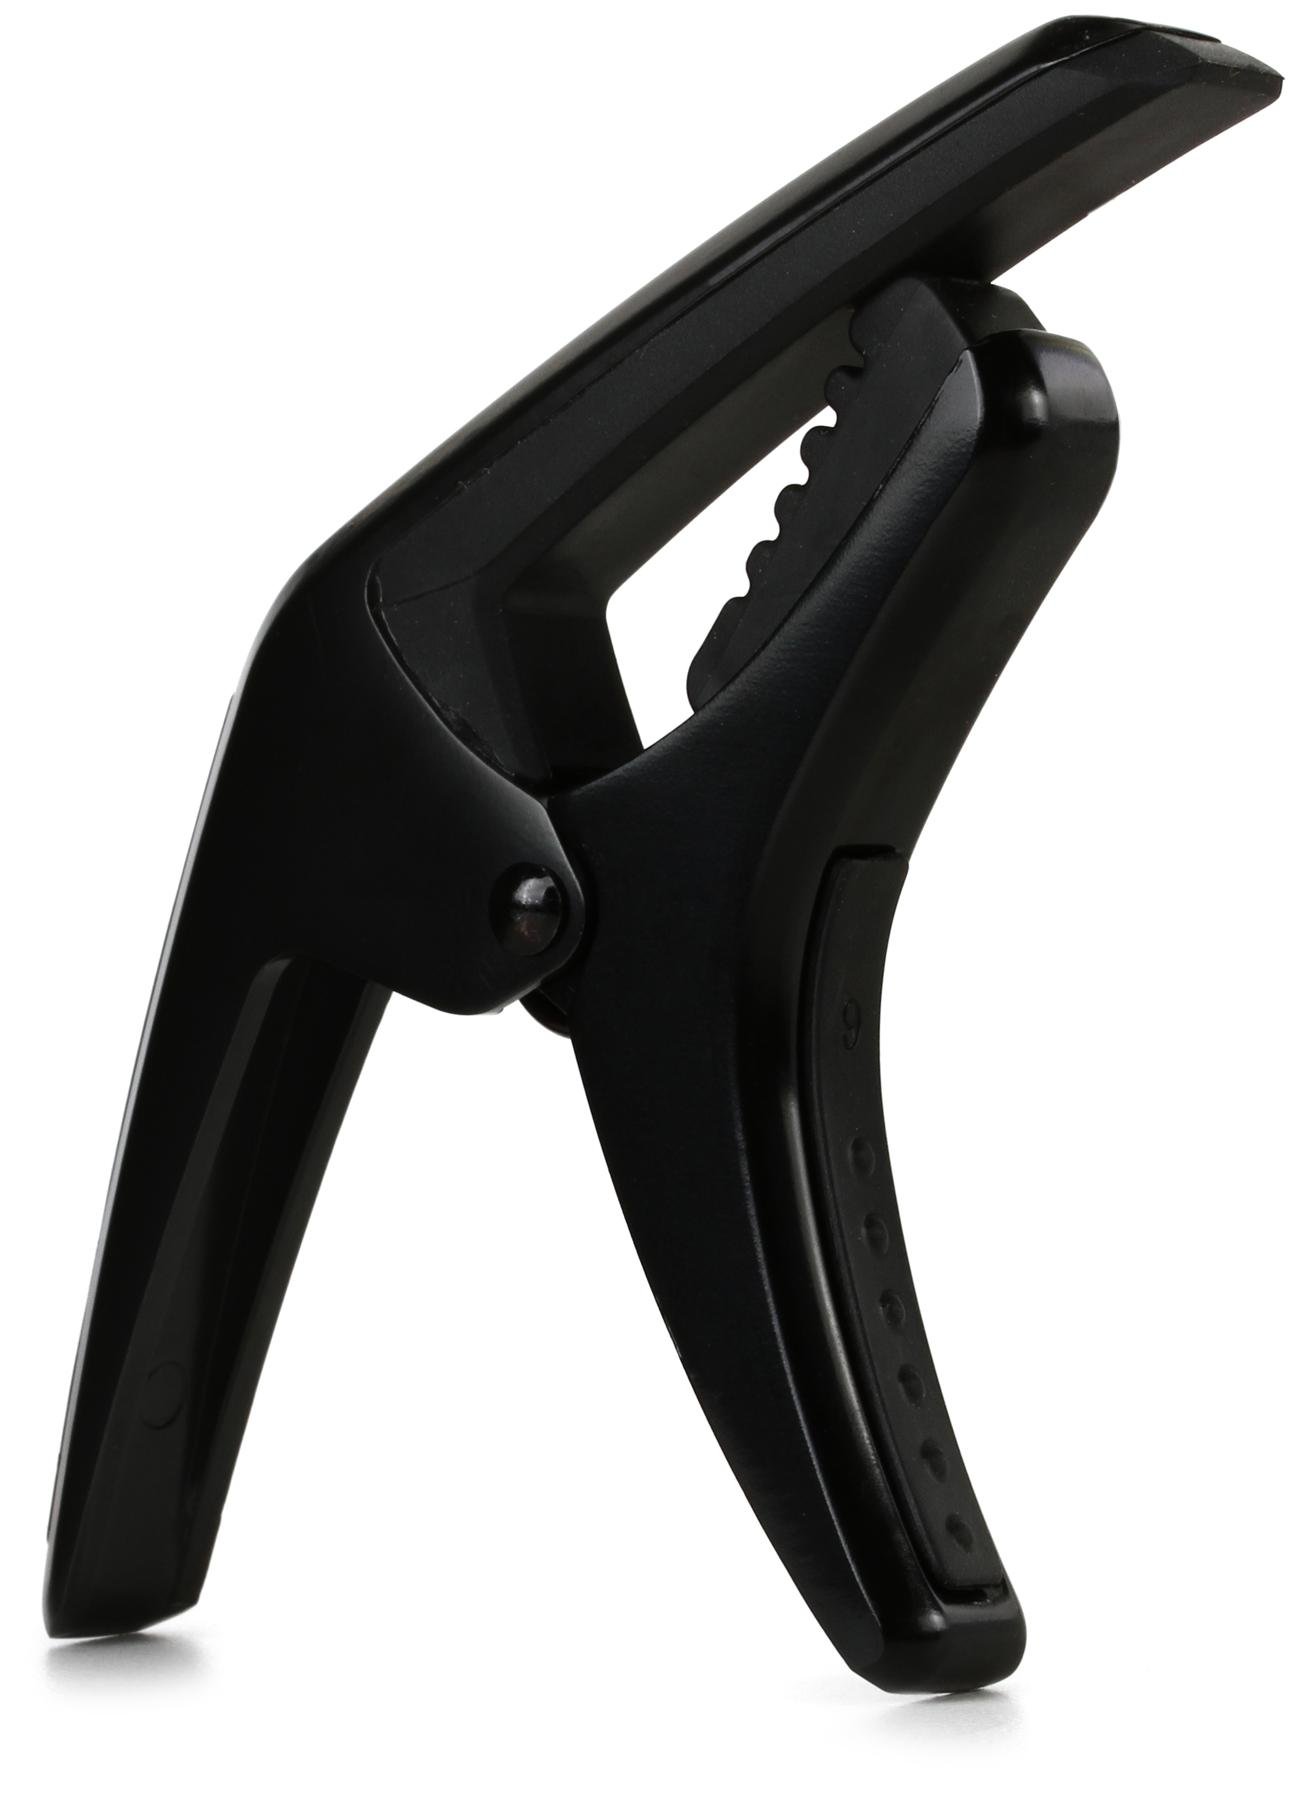 Fender Phoenix Guitar Capo for Steel-string Electric or Acoustic 